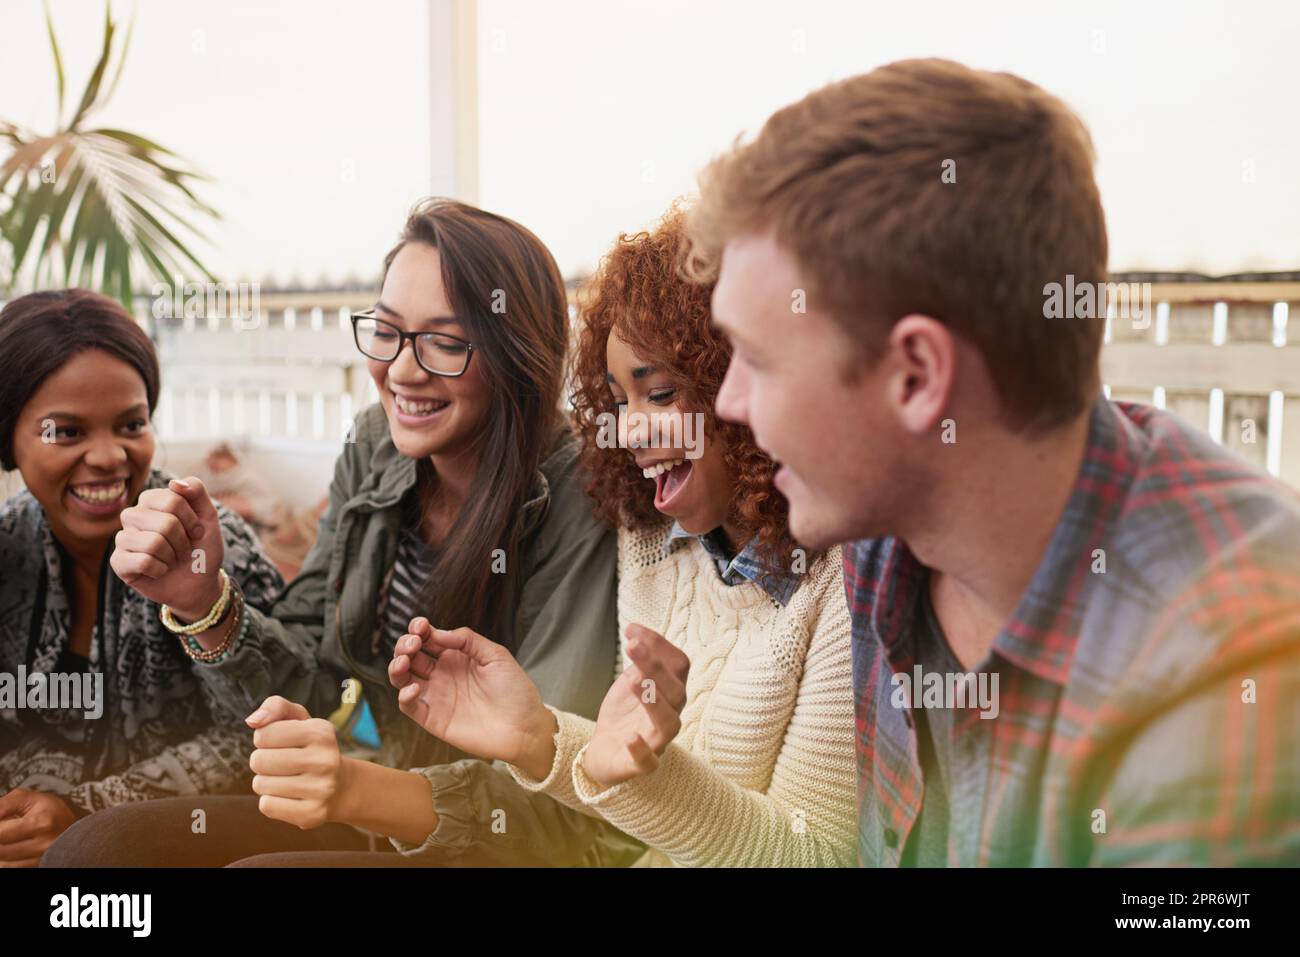 Making times to remember. Cropped shot of a group of friends laughing and having a good time. Stock Photo